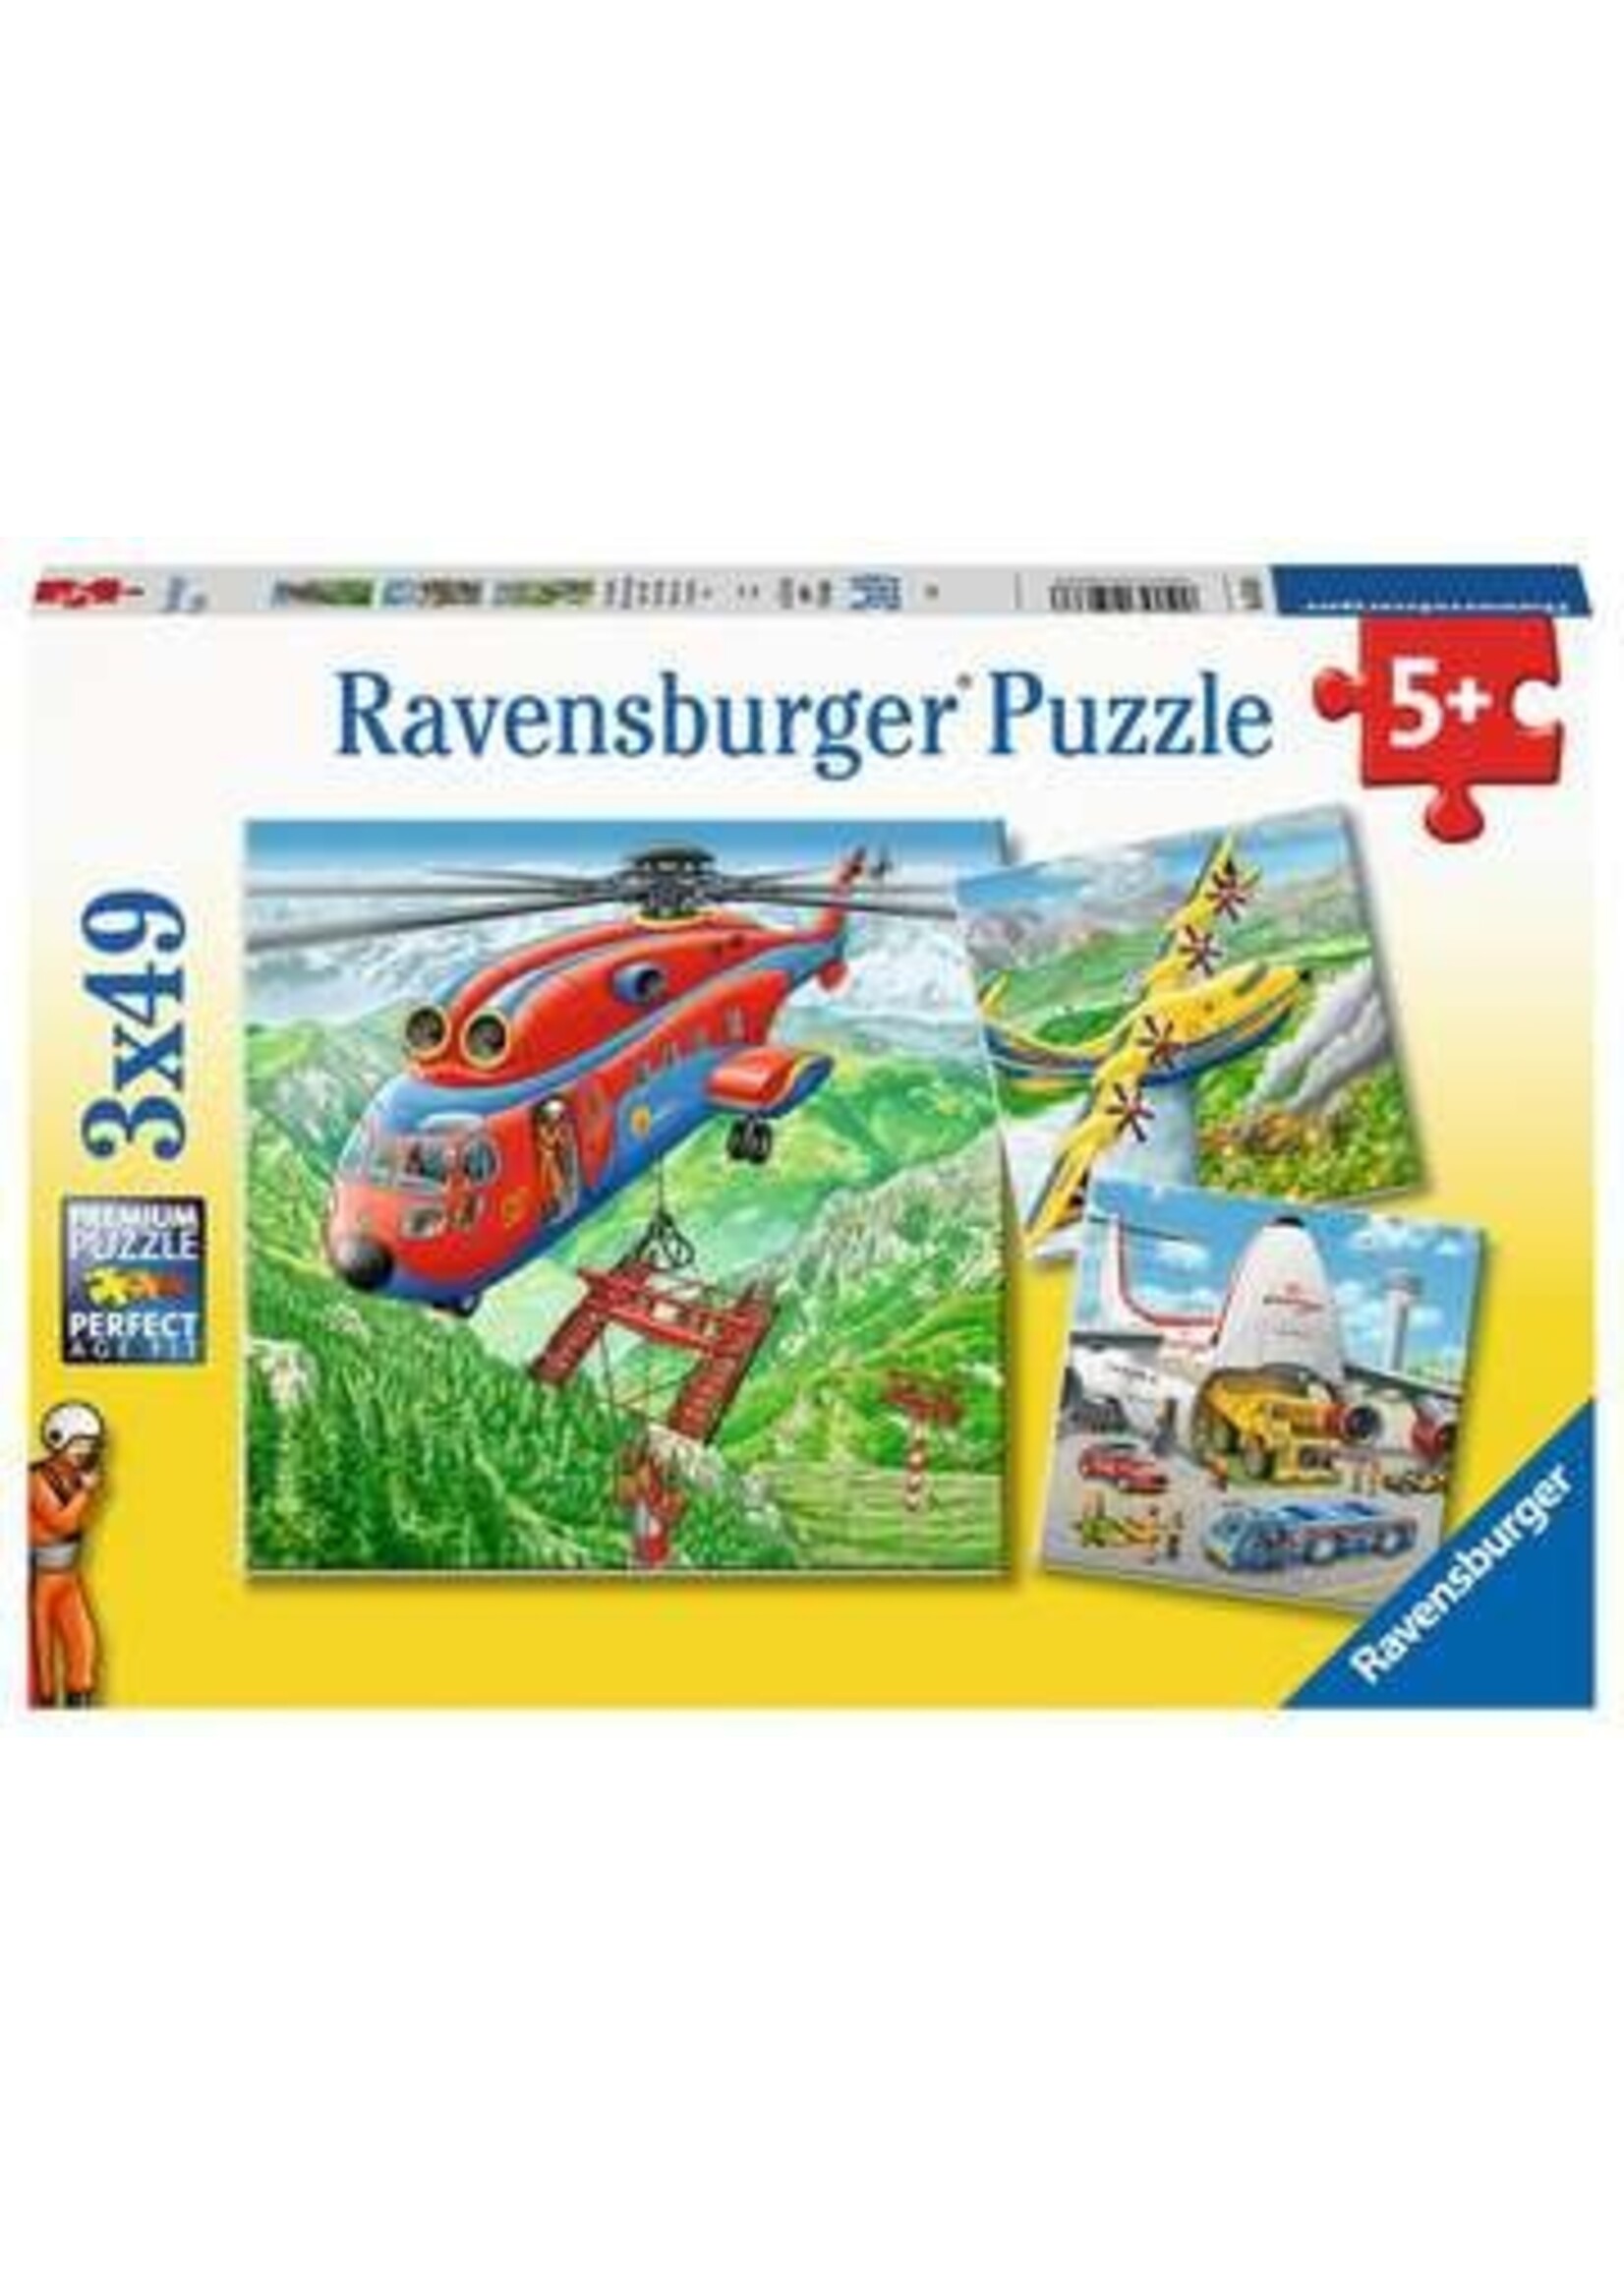 Ravensburger "Above the Clouds" 3X 49 Piece Puzzles